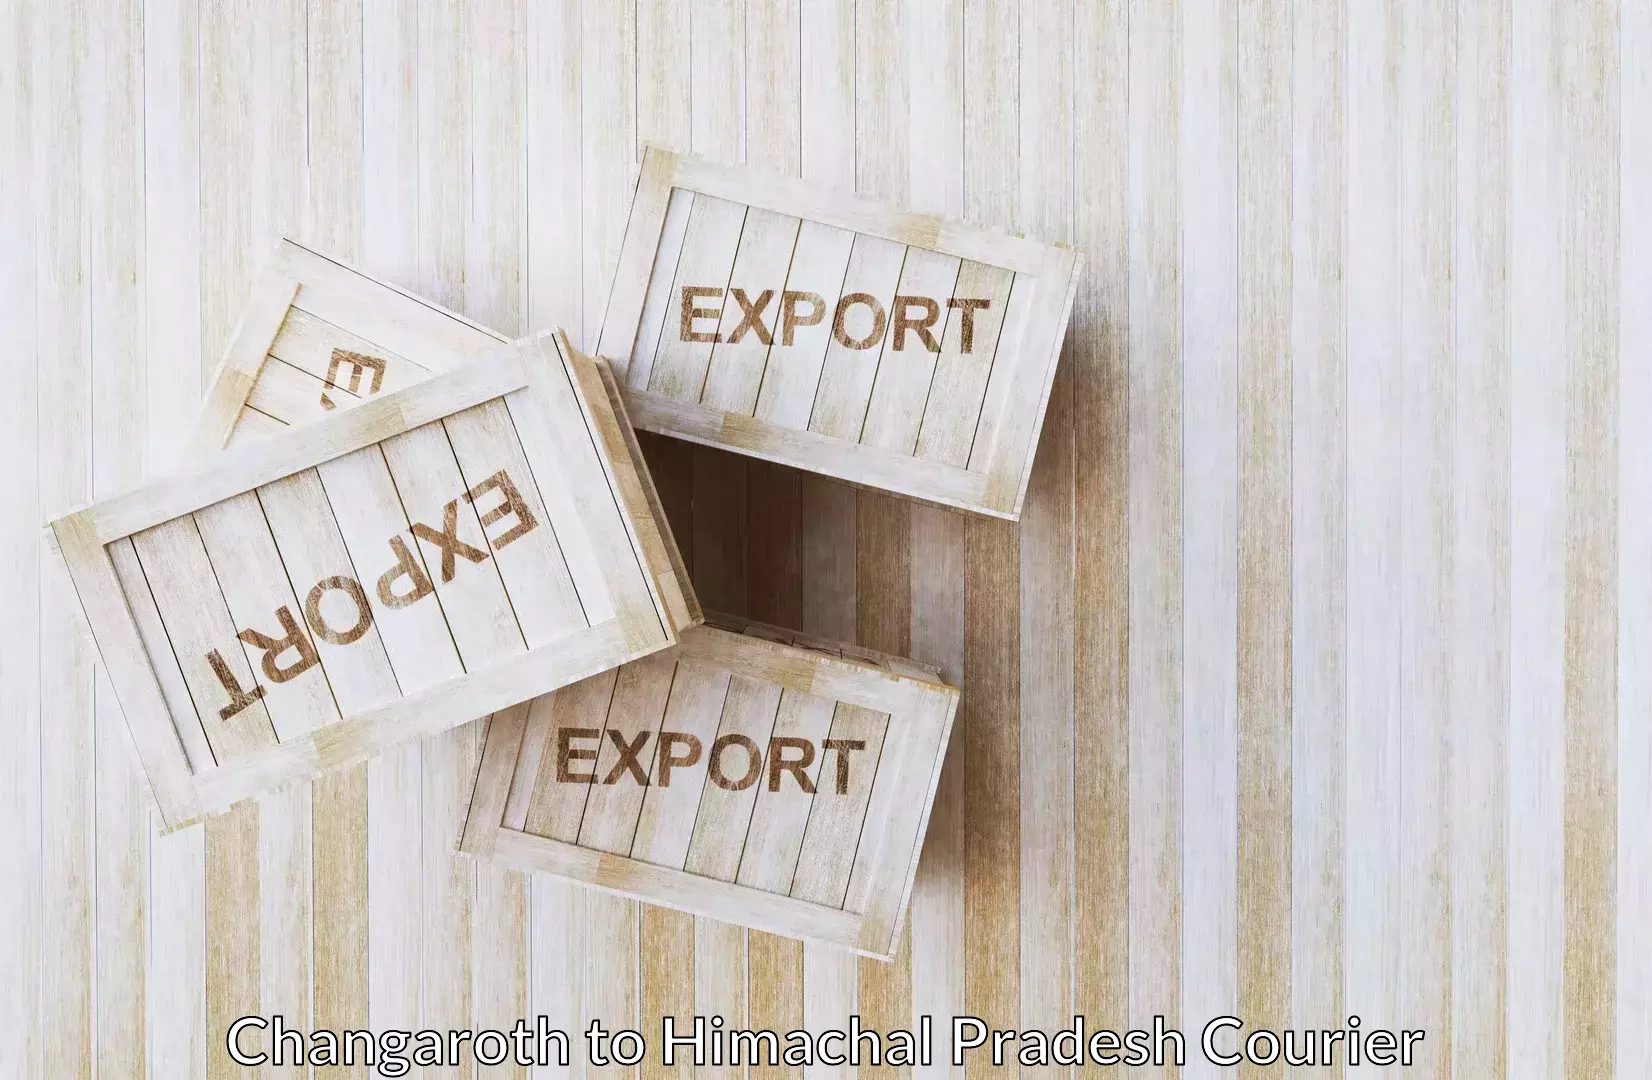 Efficient relocation services Changaroth to Chachyot